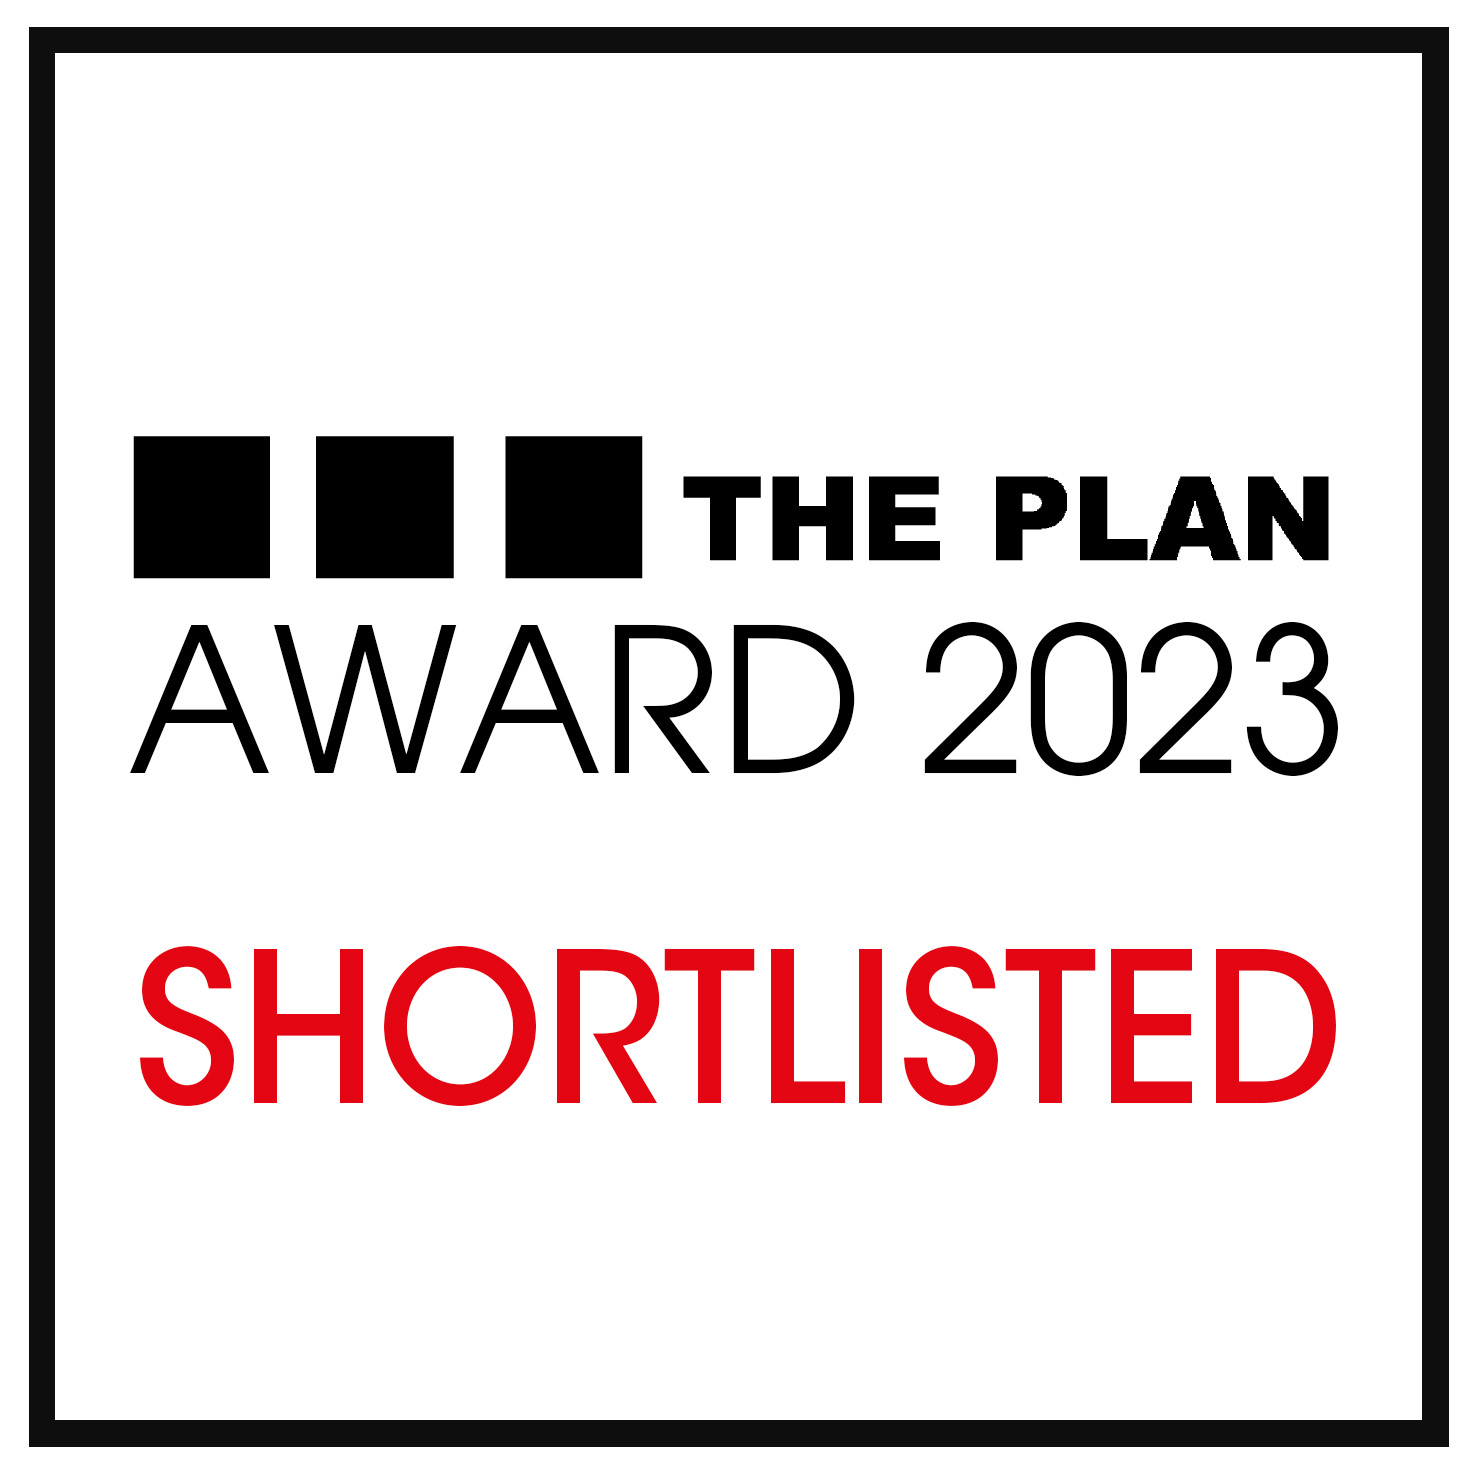 Voting now opens for THE PLAN Award 2023